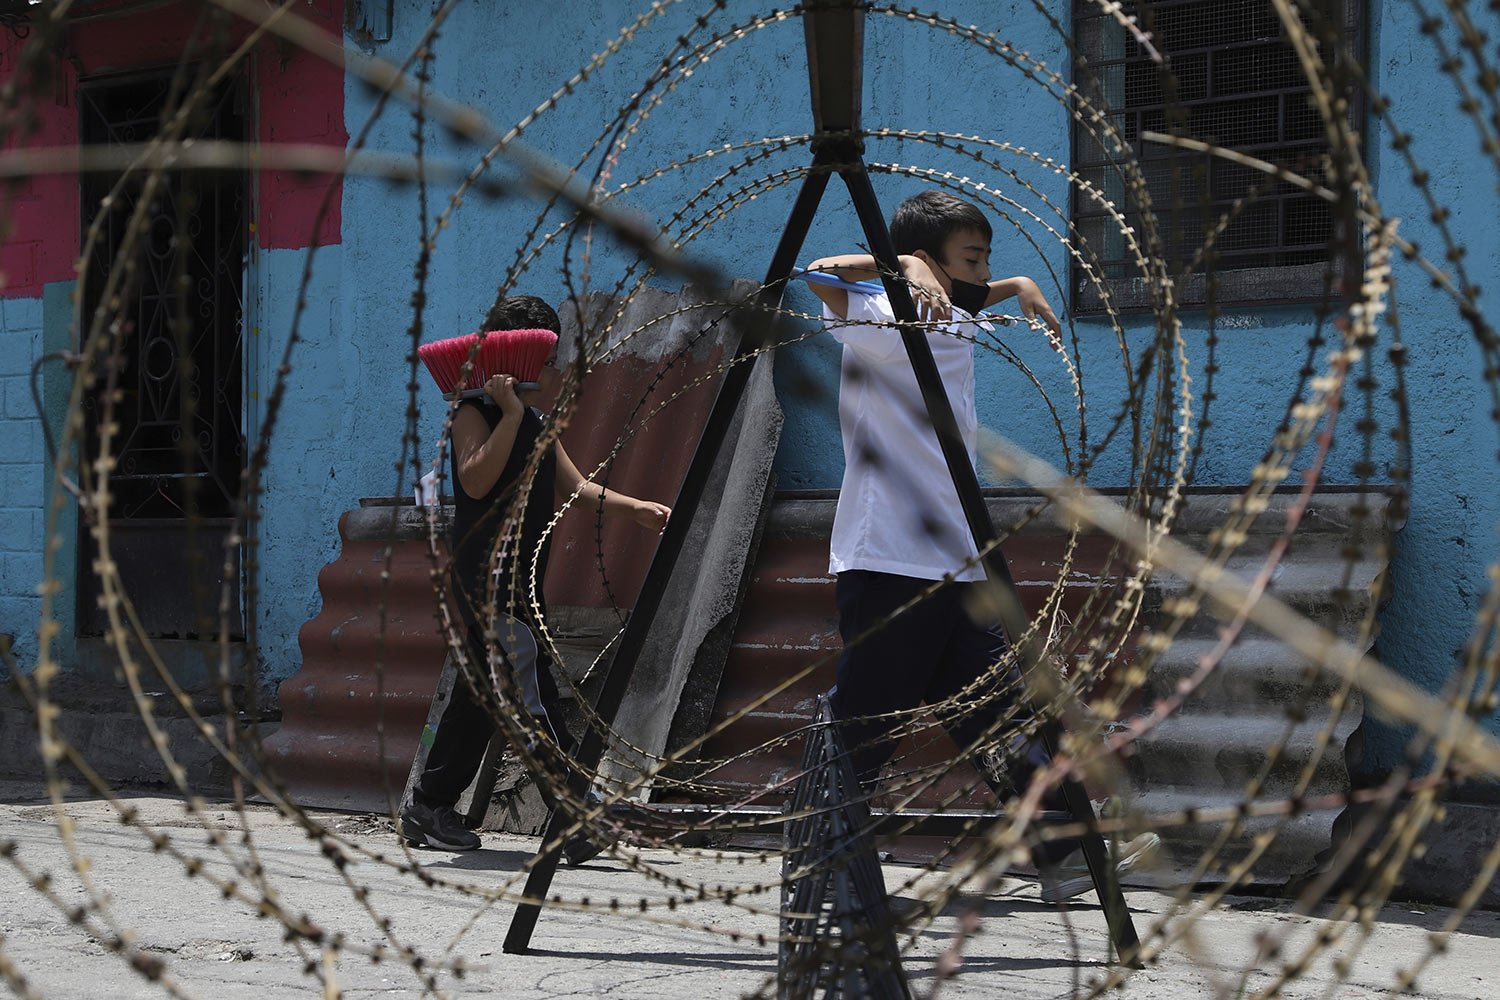  Children walk behind concertina wire as soldiers patrol the entrances of the San Jose del Pino Community in Santa Tecla, El Salvador, April 6, 2022, during a crackdown on gangs. Congress authorized prison sentences of 10 to 15 years for news media t